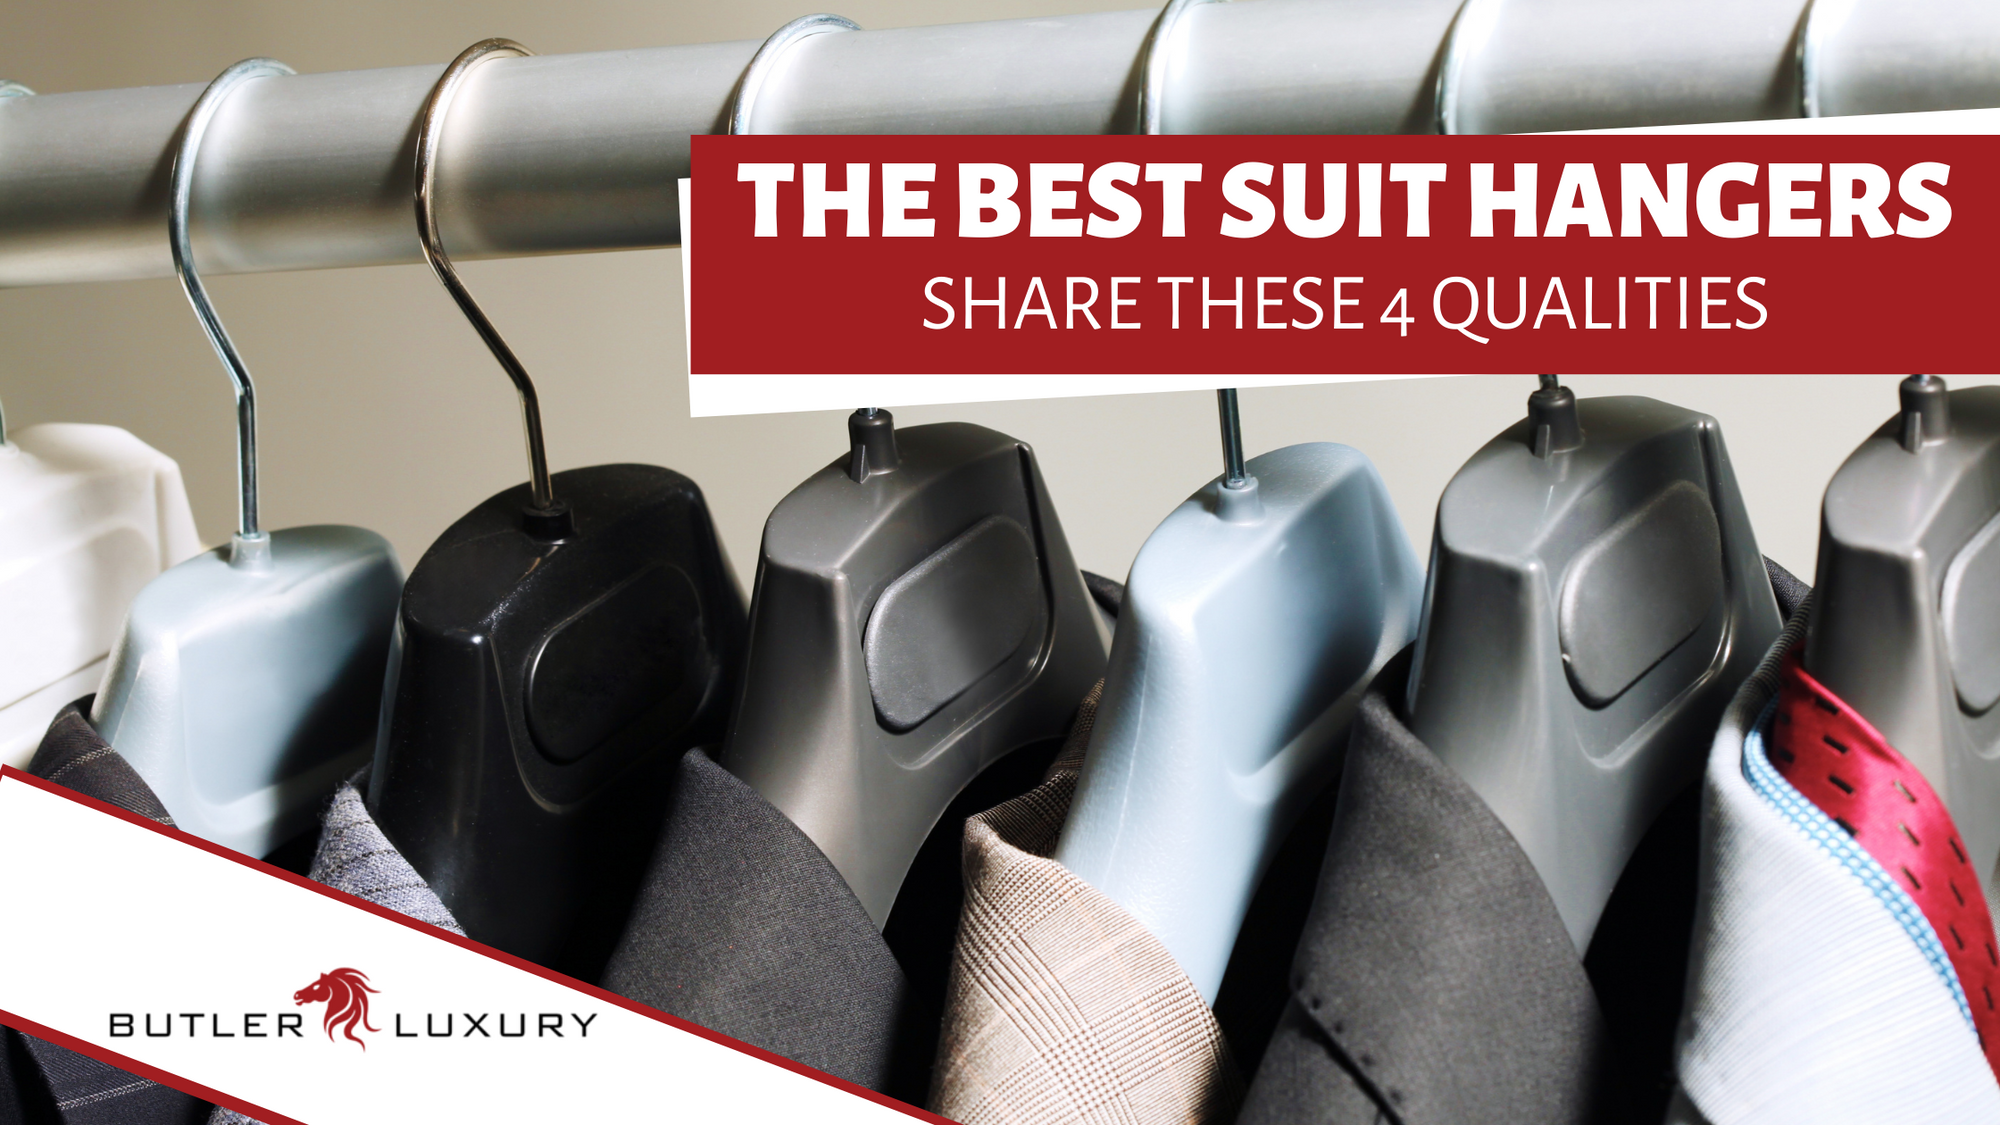 The Best Suit Hangers Share These 4 Qualities